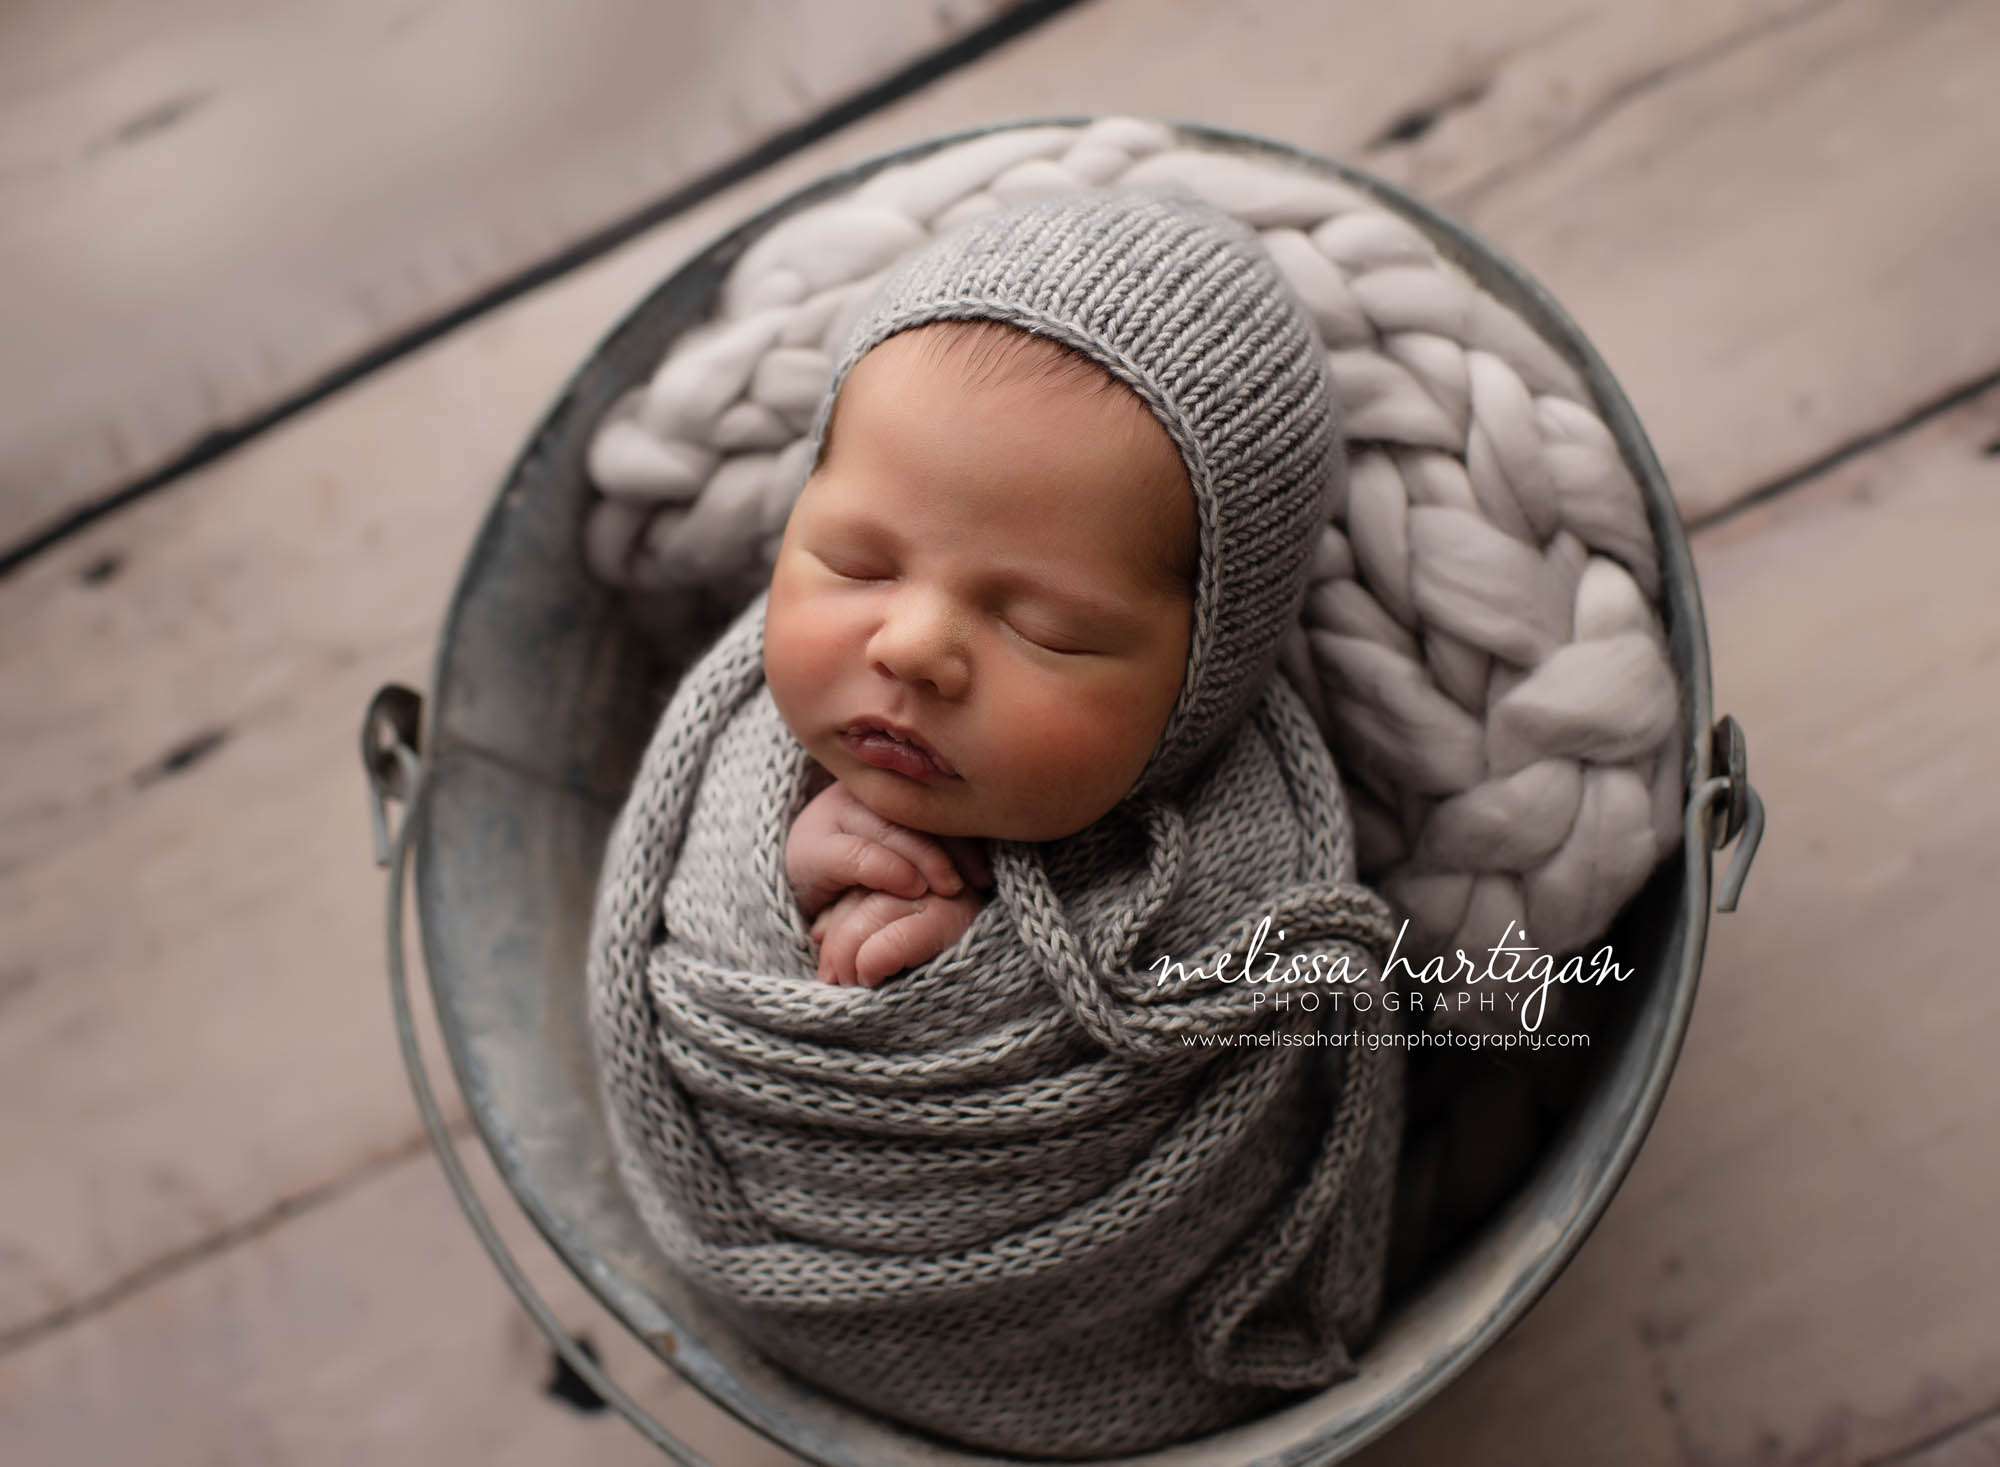 Baby boy wrapped in grey knitted wrap with grey knitted boy bonnet posed in metal bucket with light grey braided layer